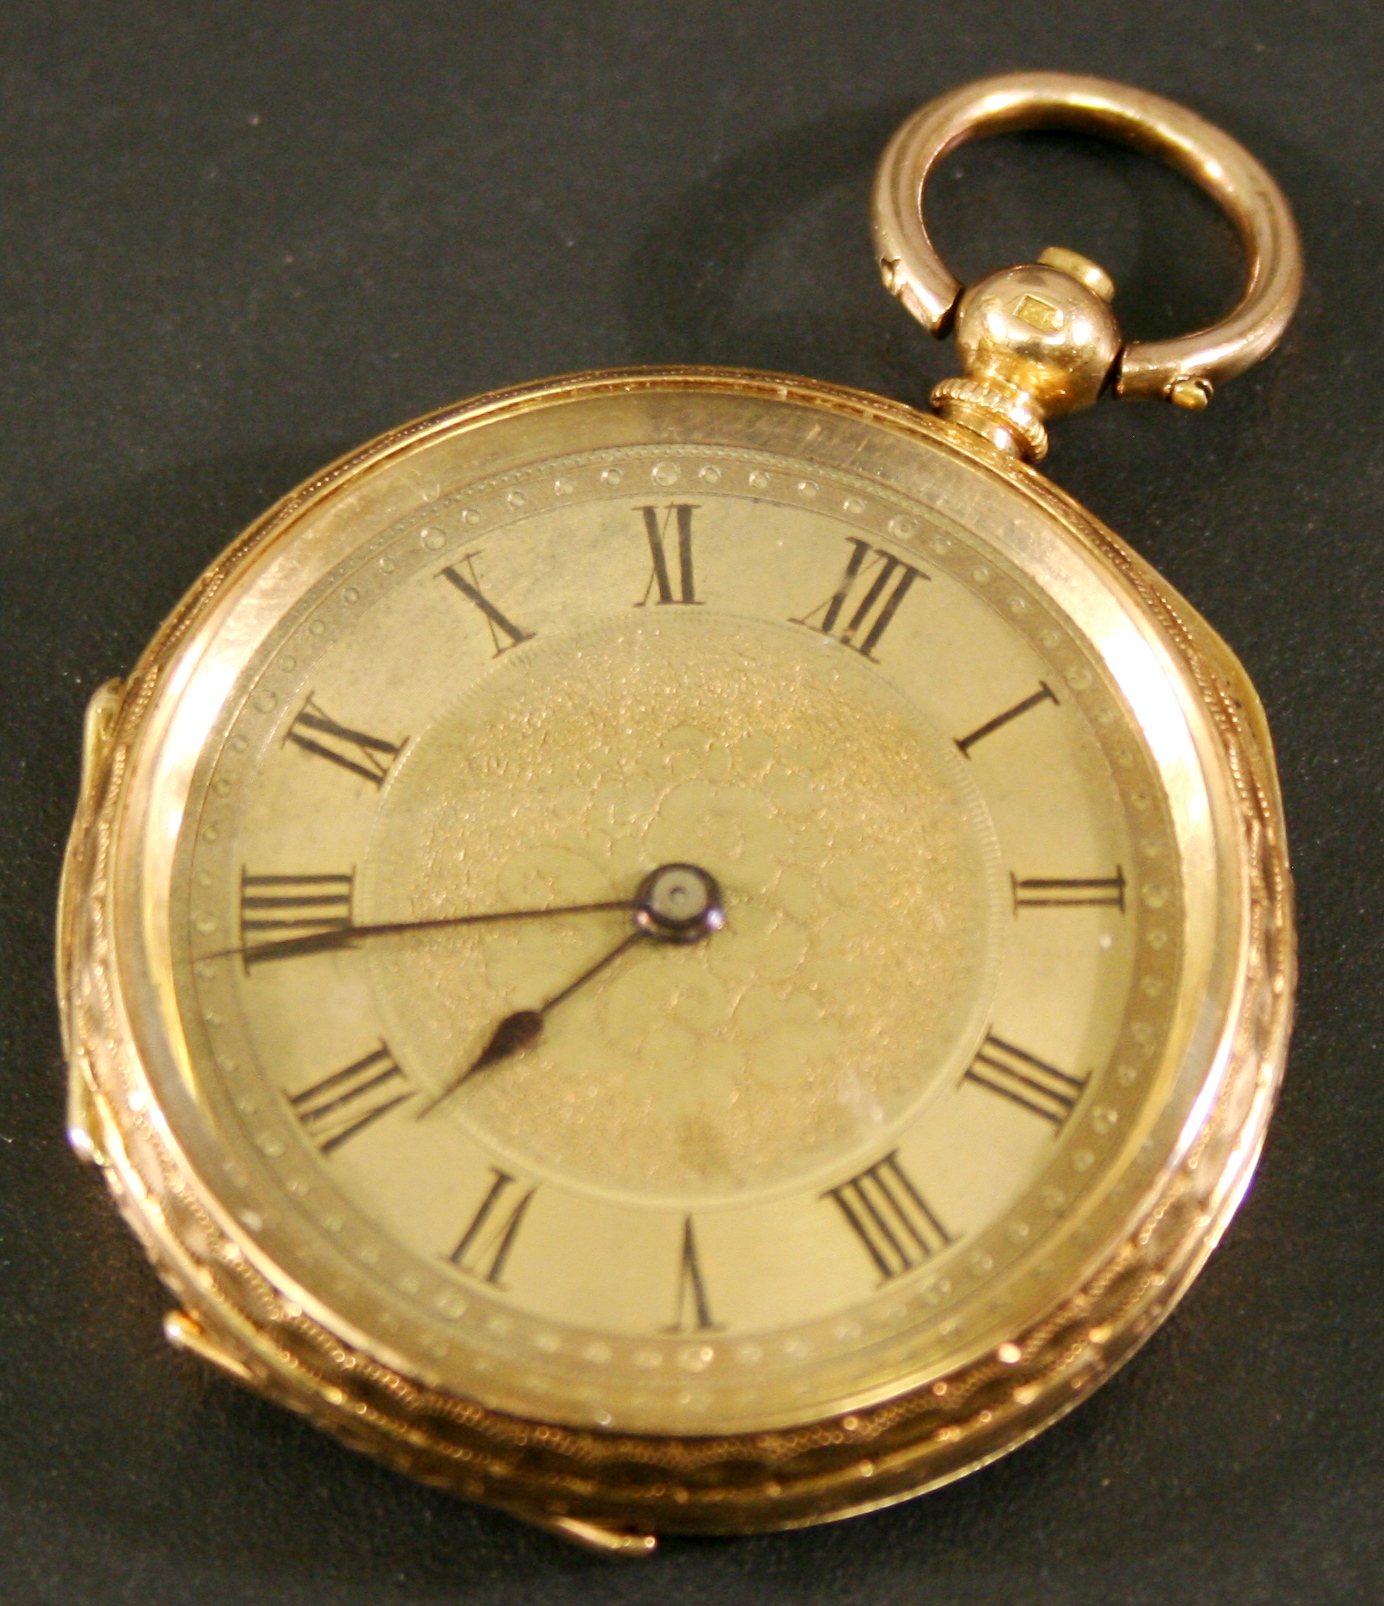 AN 18K GOLD CASED FOB WATCH, the gilt dial with Roman hours framing foliate decoration, the case